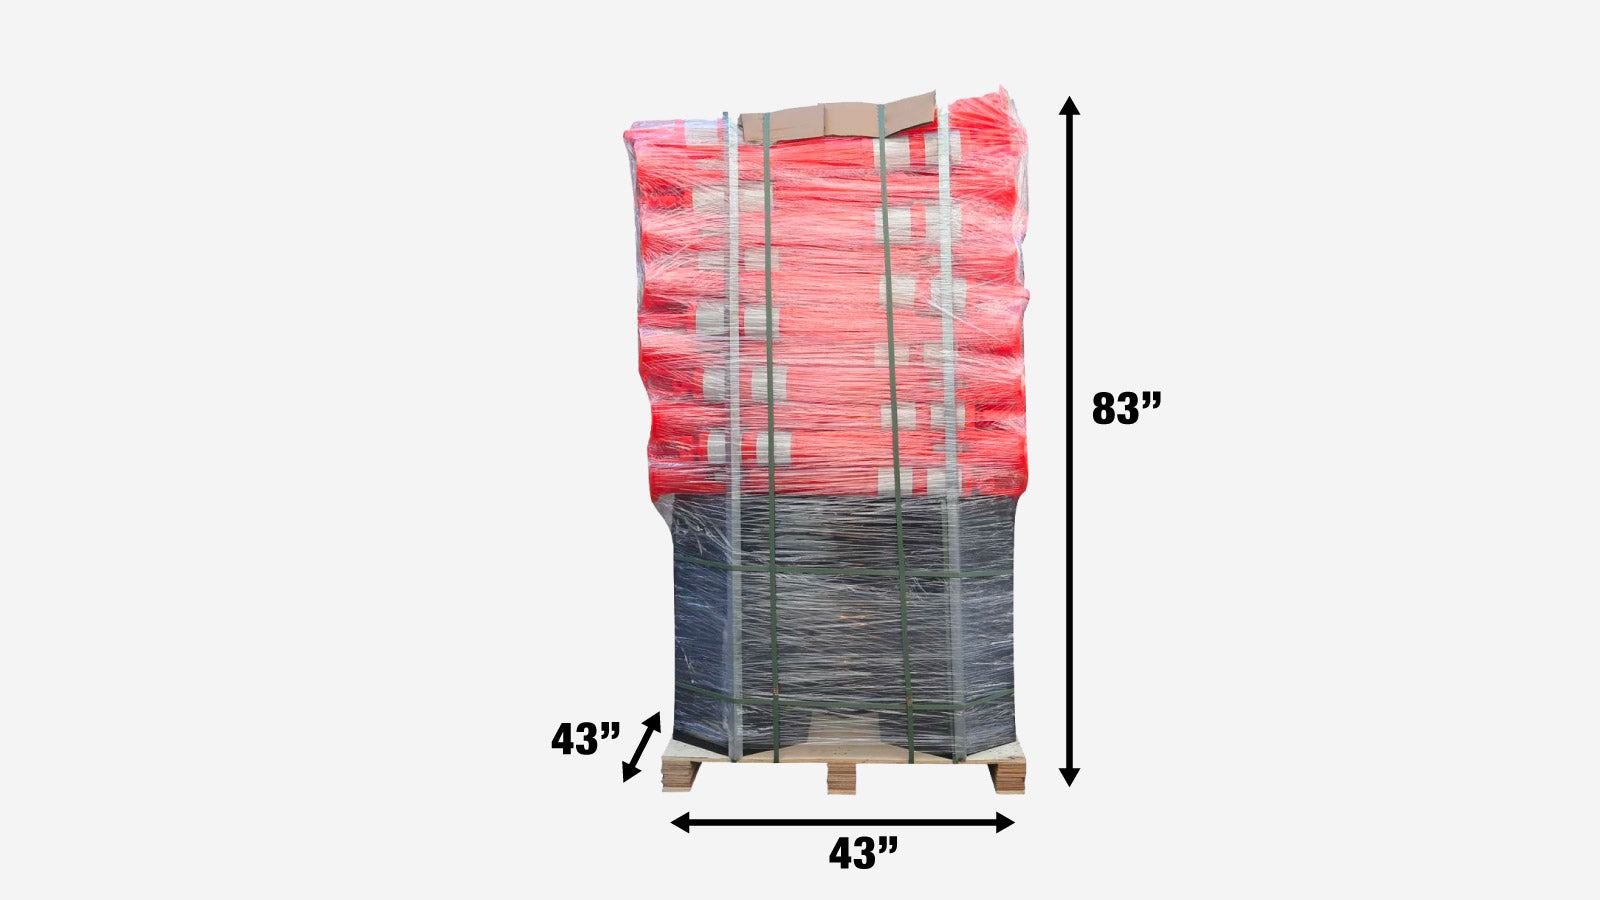 TMG-DTP45 45'' Loop Top Delineator Traffic Post, 120 units packed in one pallet-shipping-info-image